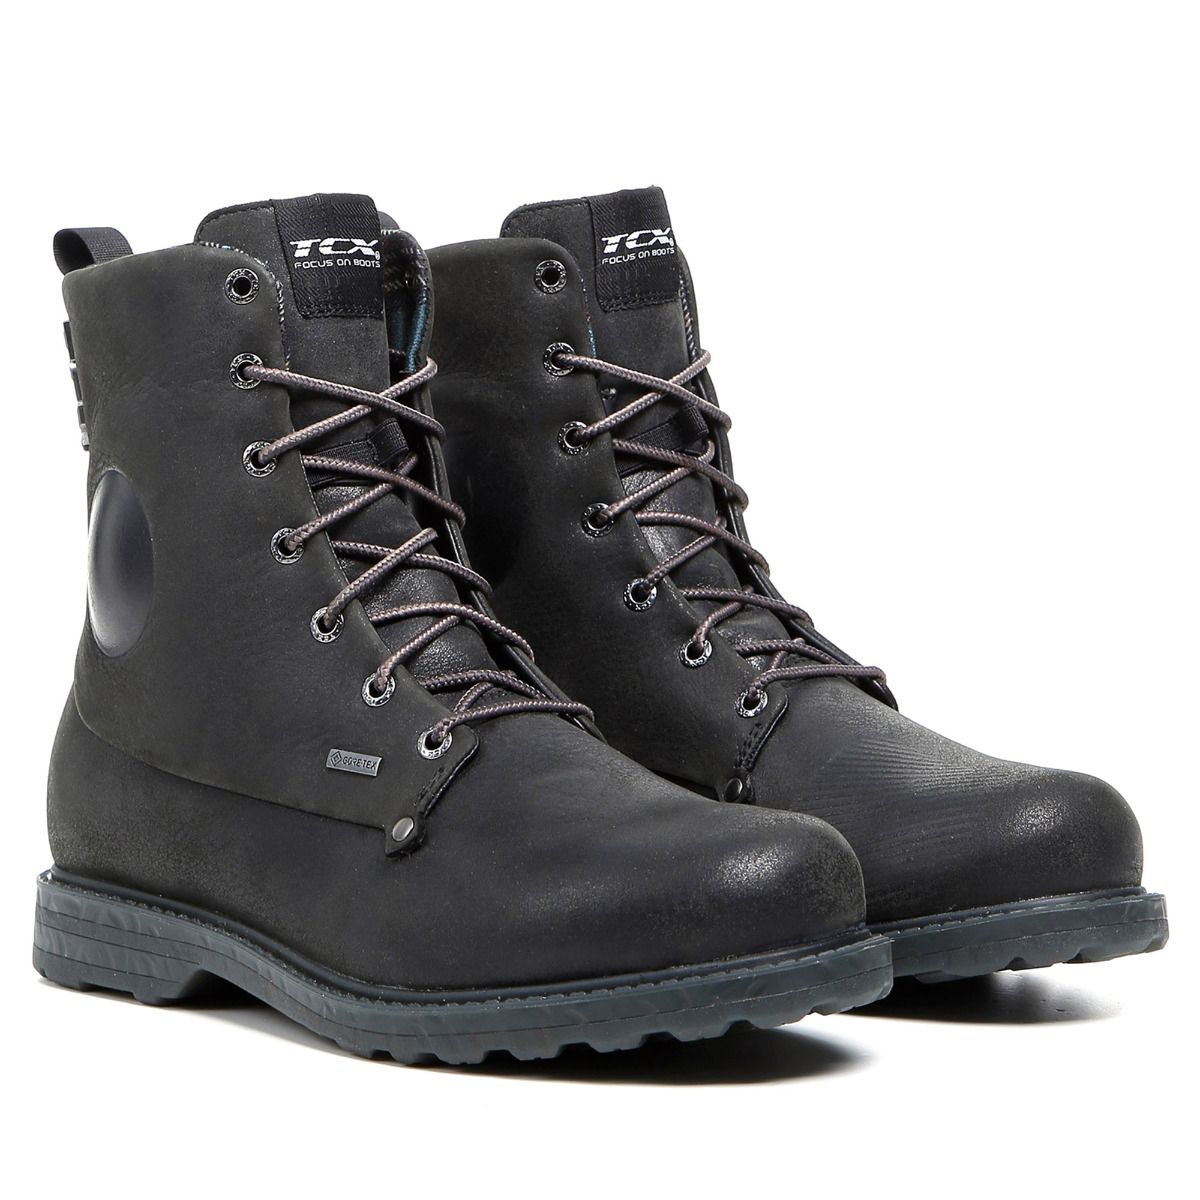 Image of TCX Boot Blend 2 Gore-Tex Black Size 40 ID 8000958234344